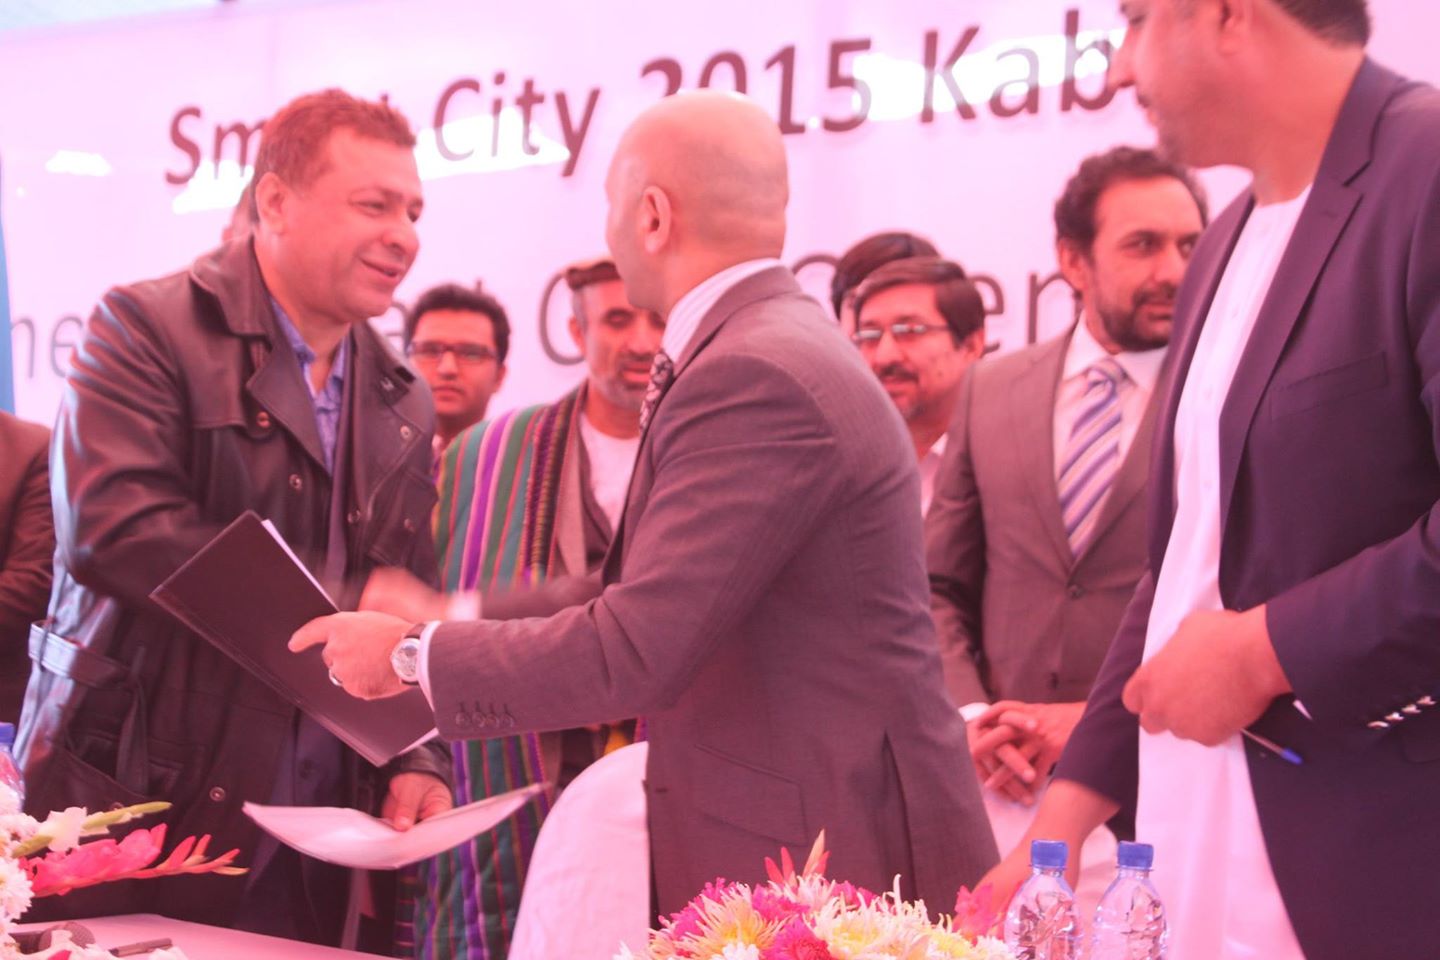 Caption: Convicted Kabul Bank shareholder Khalil Ferozi is treated as a guest of honor during the 4 November 2014 stone-laying ceremony for Kabul's Smart City, where he signs an MoU with the ministry of urban development. Source: ministry of urban development.